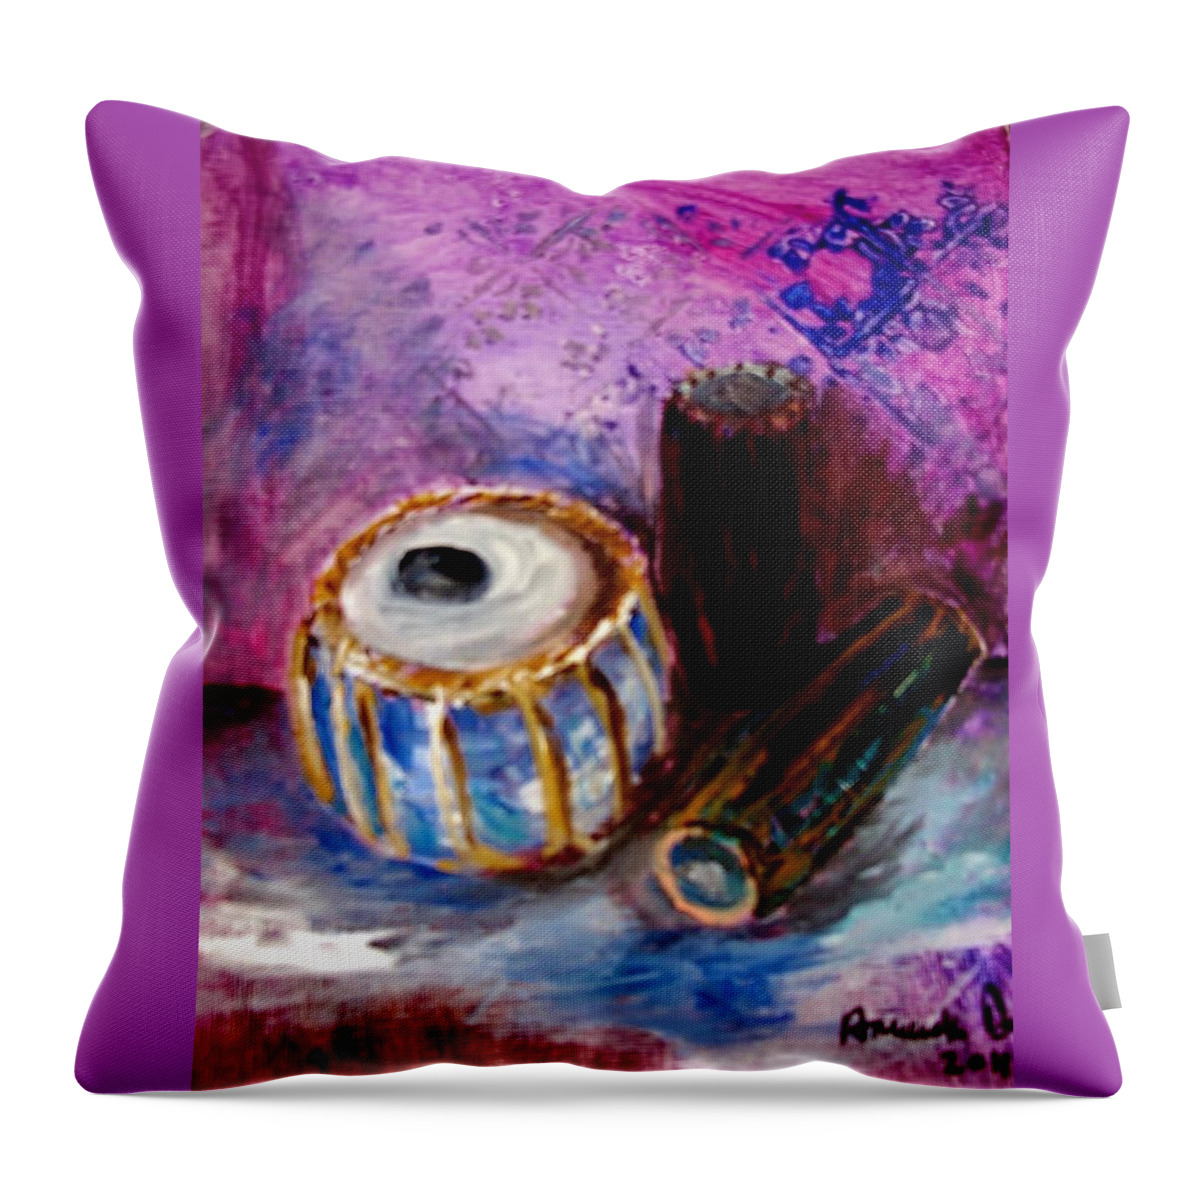 Drums Throw Pillow featuring the painting Drums 4 by Amanda Dinan